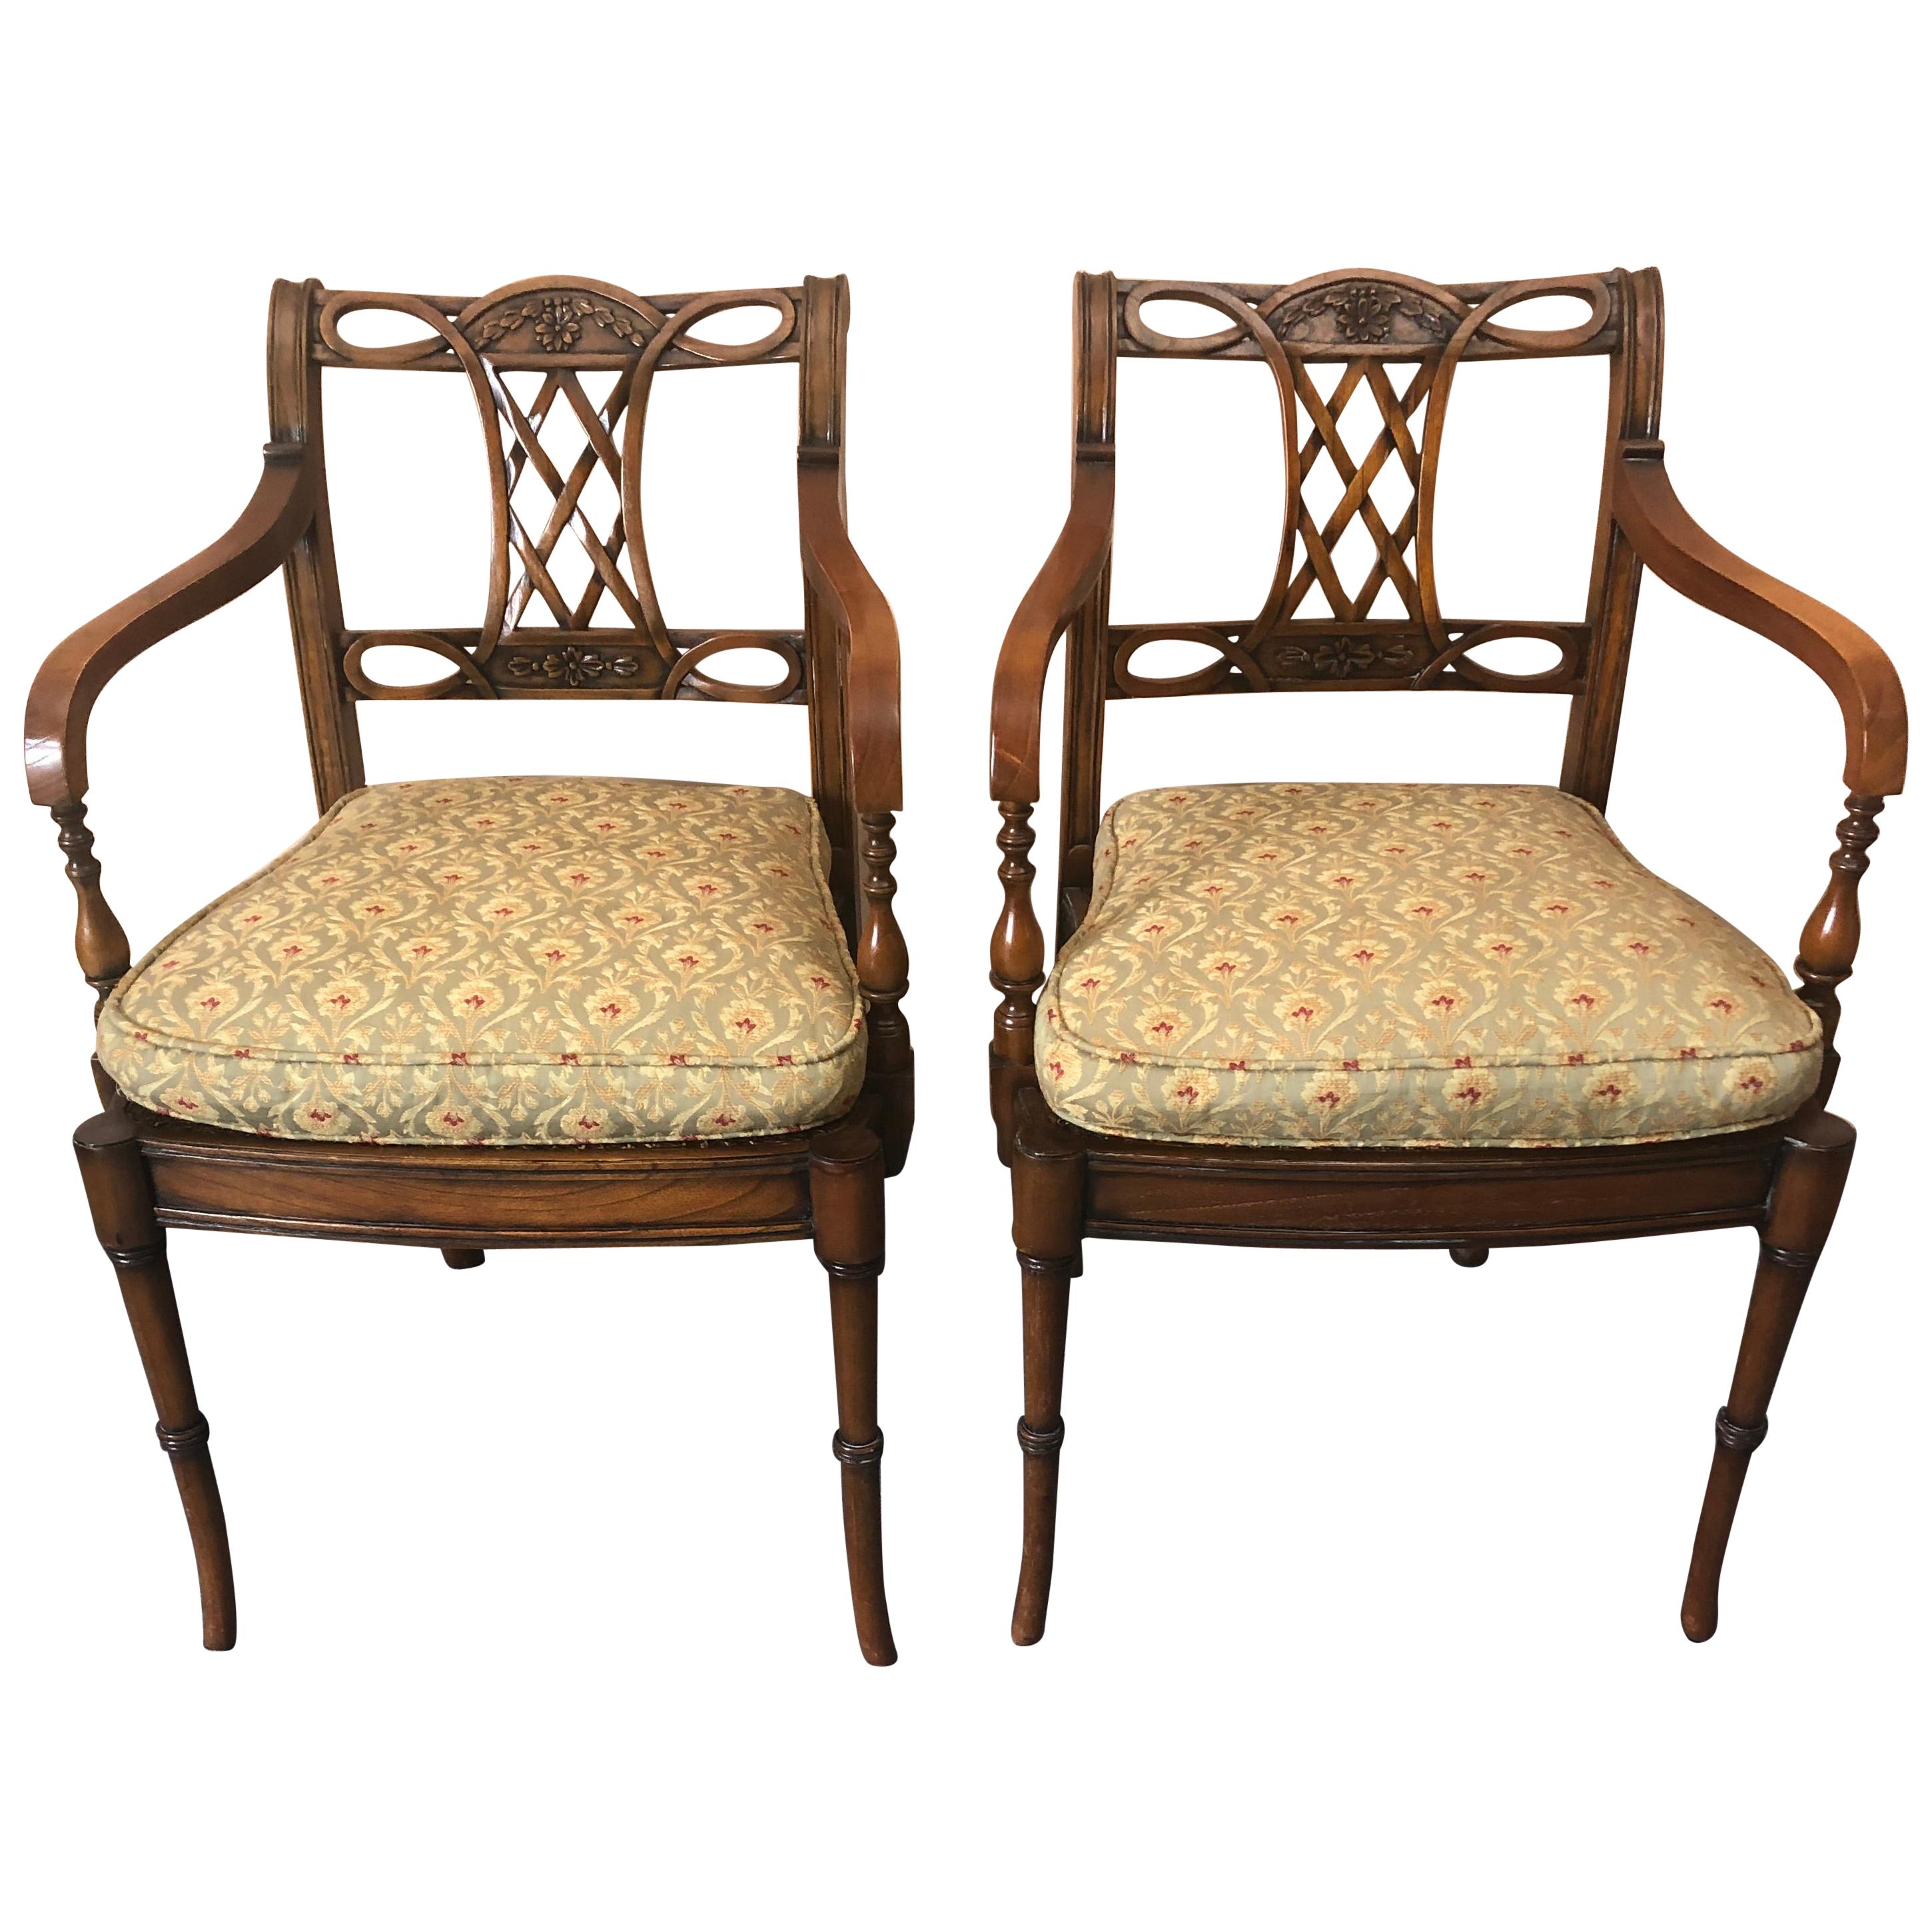 Refined Pair of Maitland Smith Mahogany Armchairs with Caned Seats  For Sale